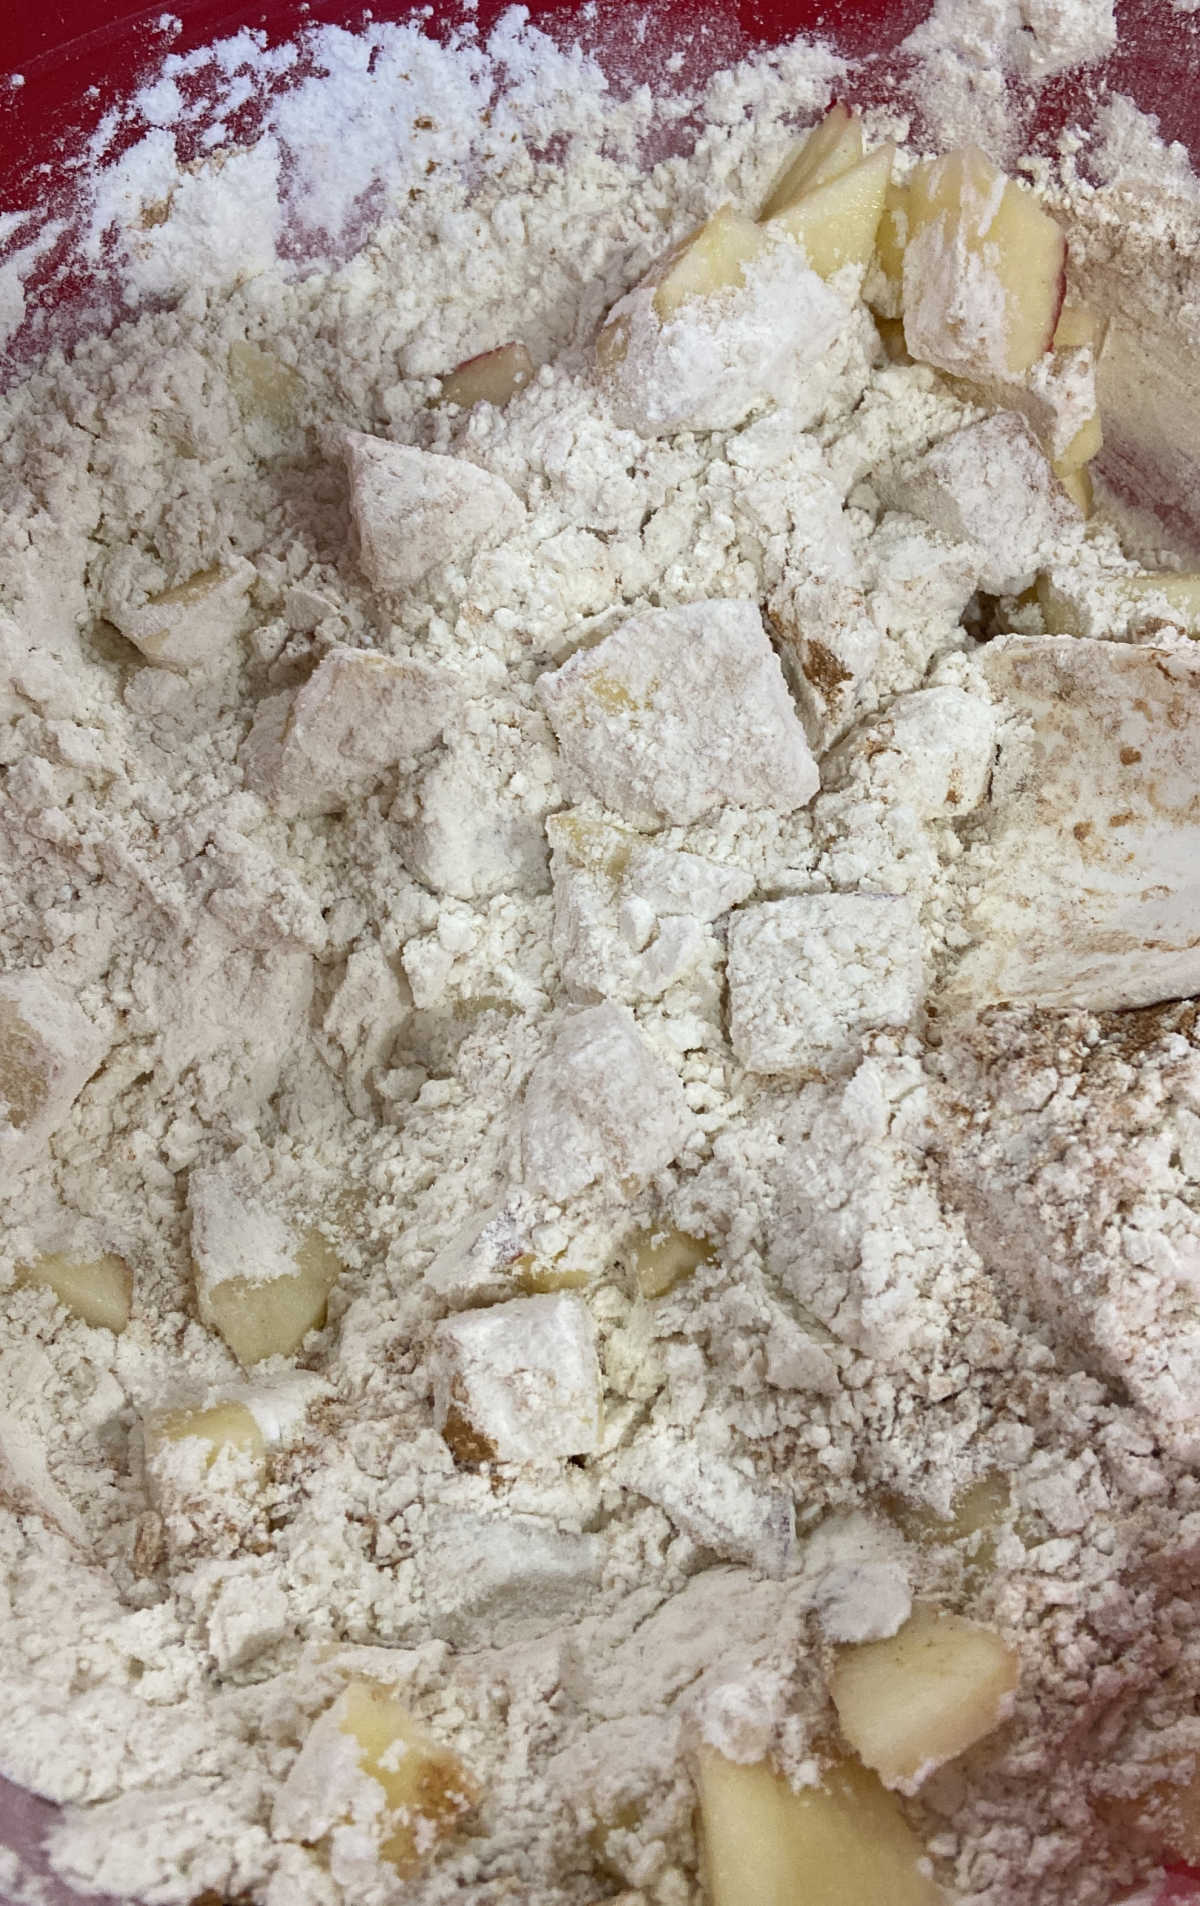 apples mixed into a dry flour mixture.